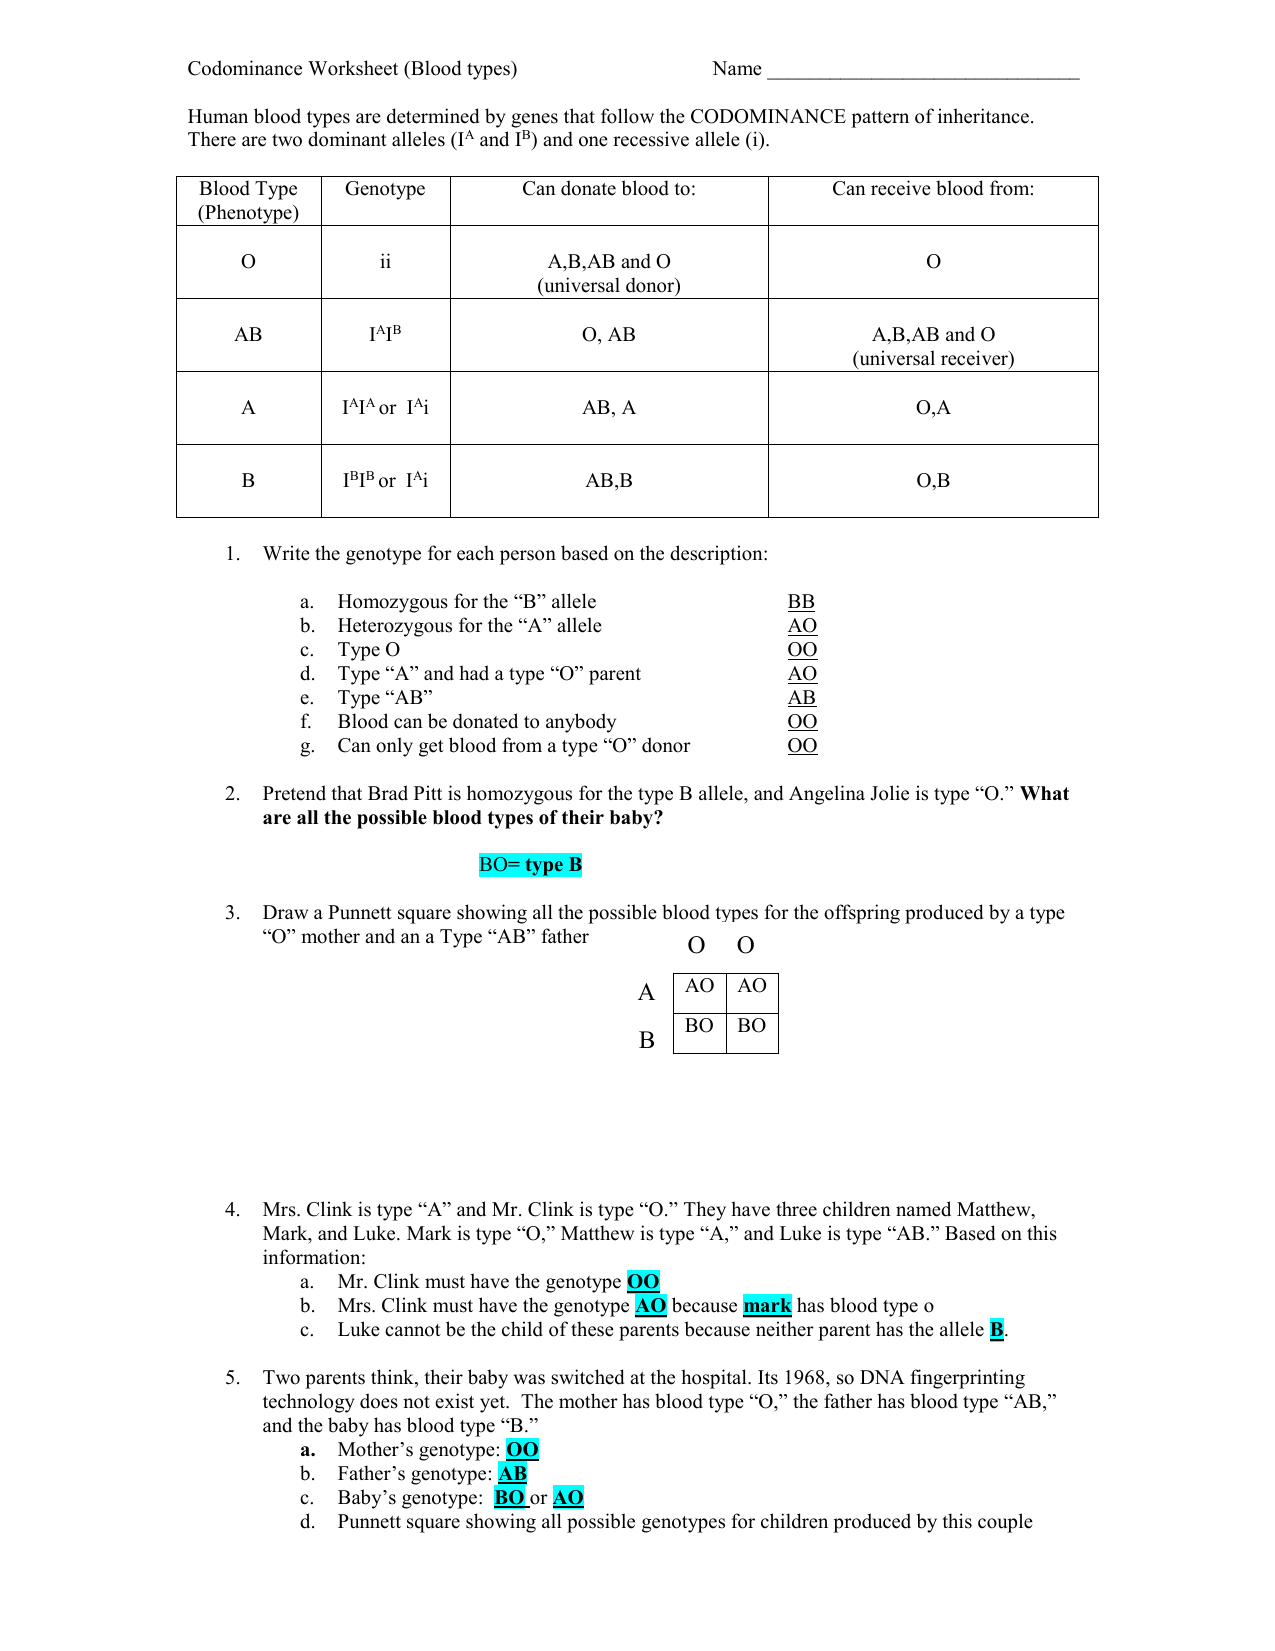 blood-type-practice-problems complete In Codominance Worksheet Blood Types